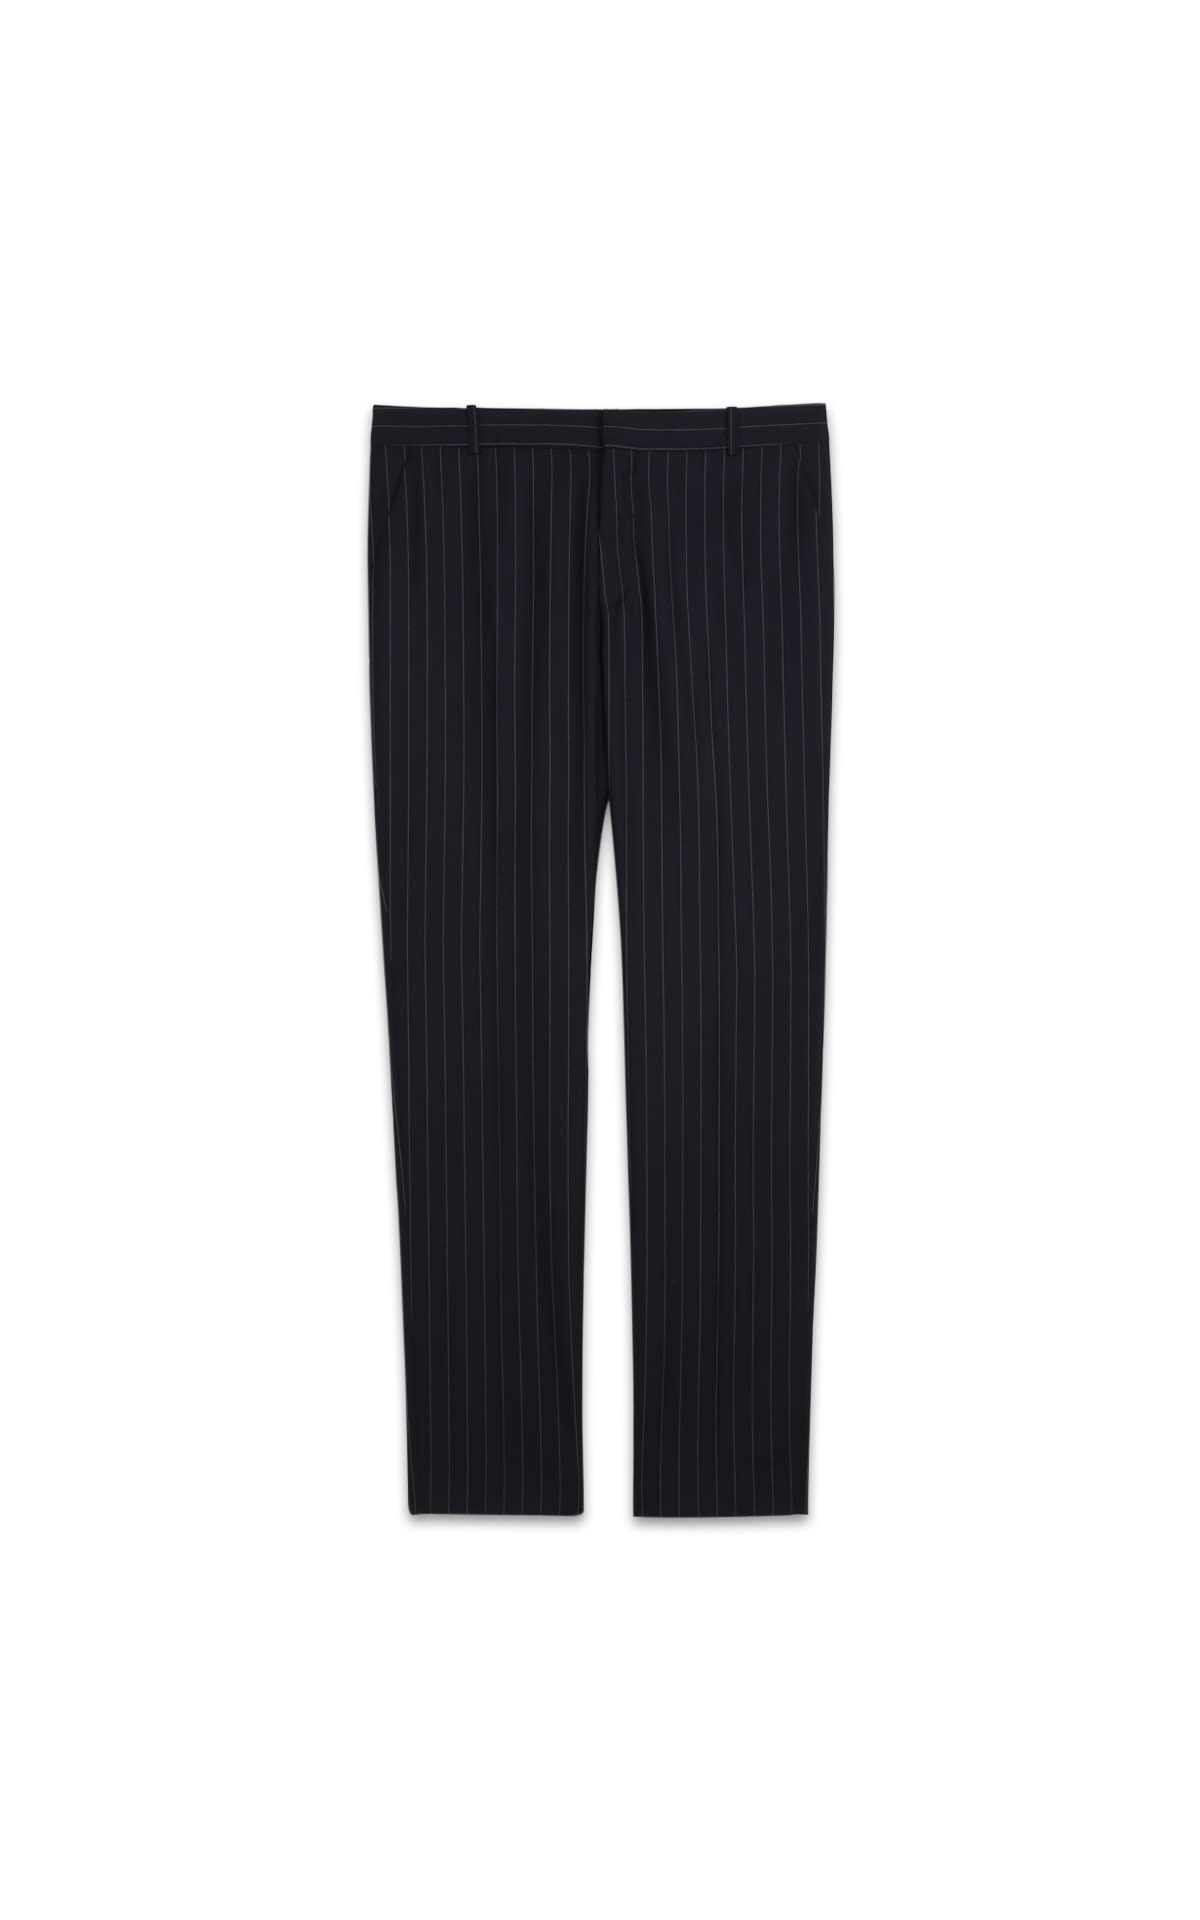 Straight-cut striped suit trousers